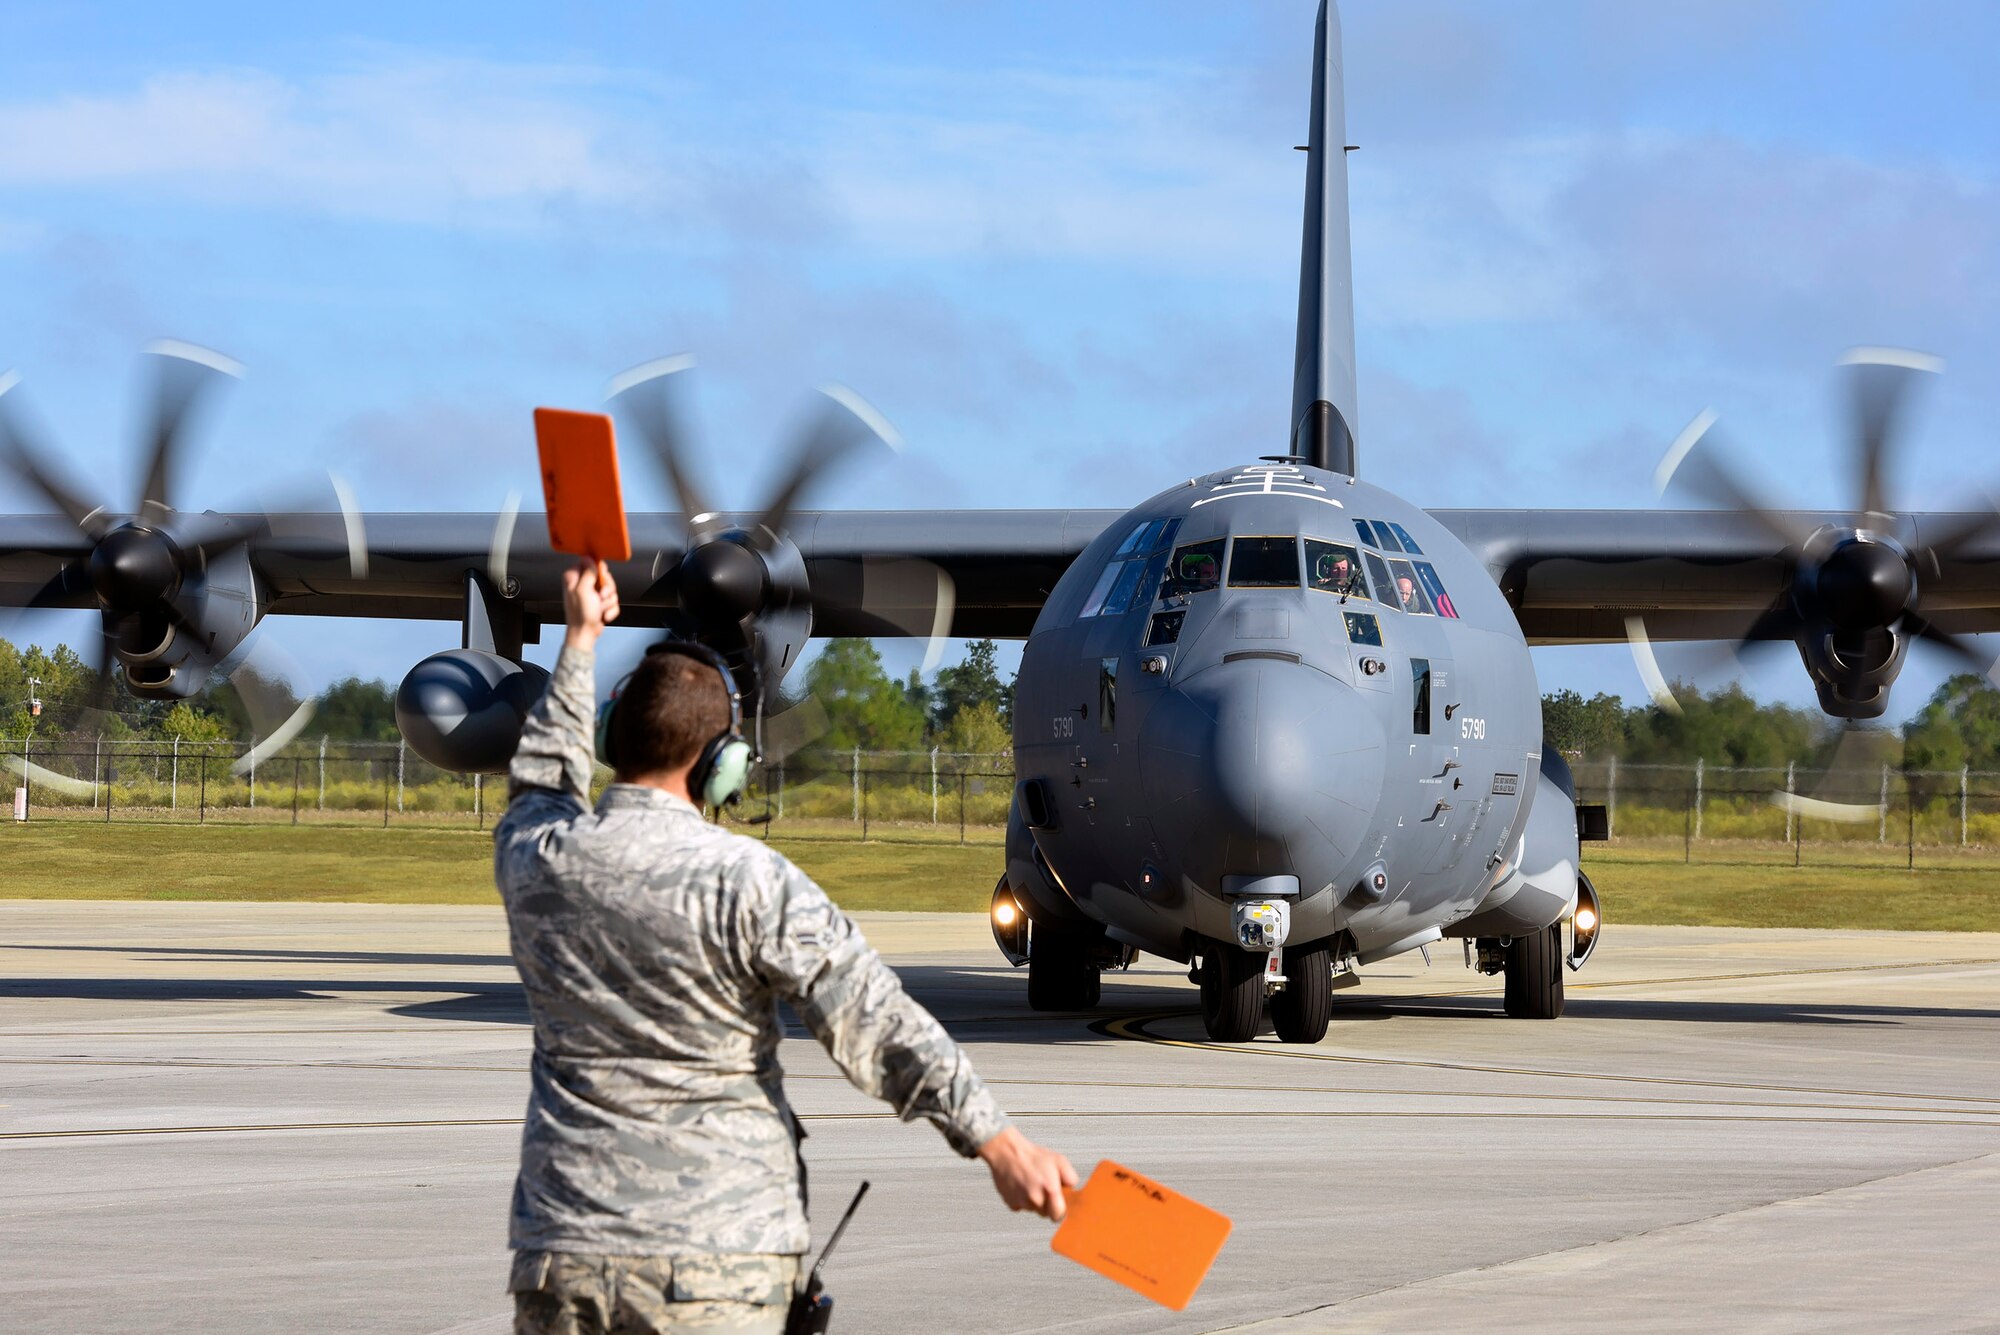 U.S. Air Force Airman 1st Class Justin Roberts, 71st Rescue Squadron crew chief, marshals an HC-130J Combat King II before take-off, Sept. 27, 2016, at Moody Air Force Base, Ga. Members of the 71st RQS are responsible for maintaining combat-ready HC-130J aircraft to provide rapidly deployable, expeditionary personnel recovery forces for contingency and crisis response operations worldwide. (U.S. Air Force photo by Airman 1st Class Greg Nash)